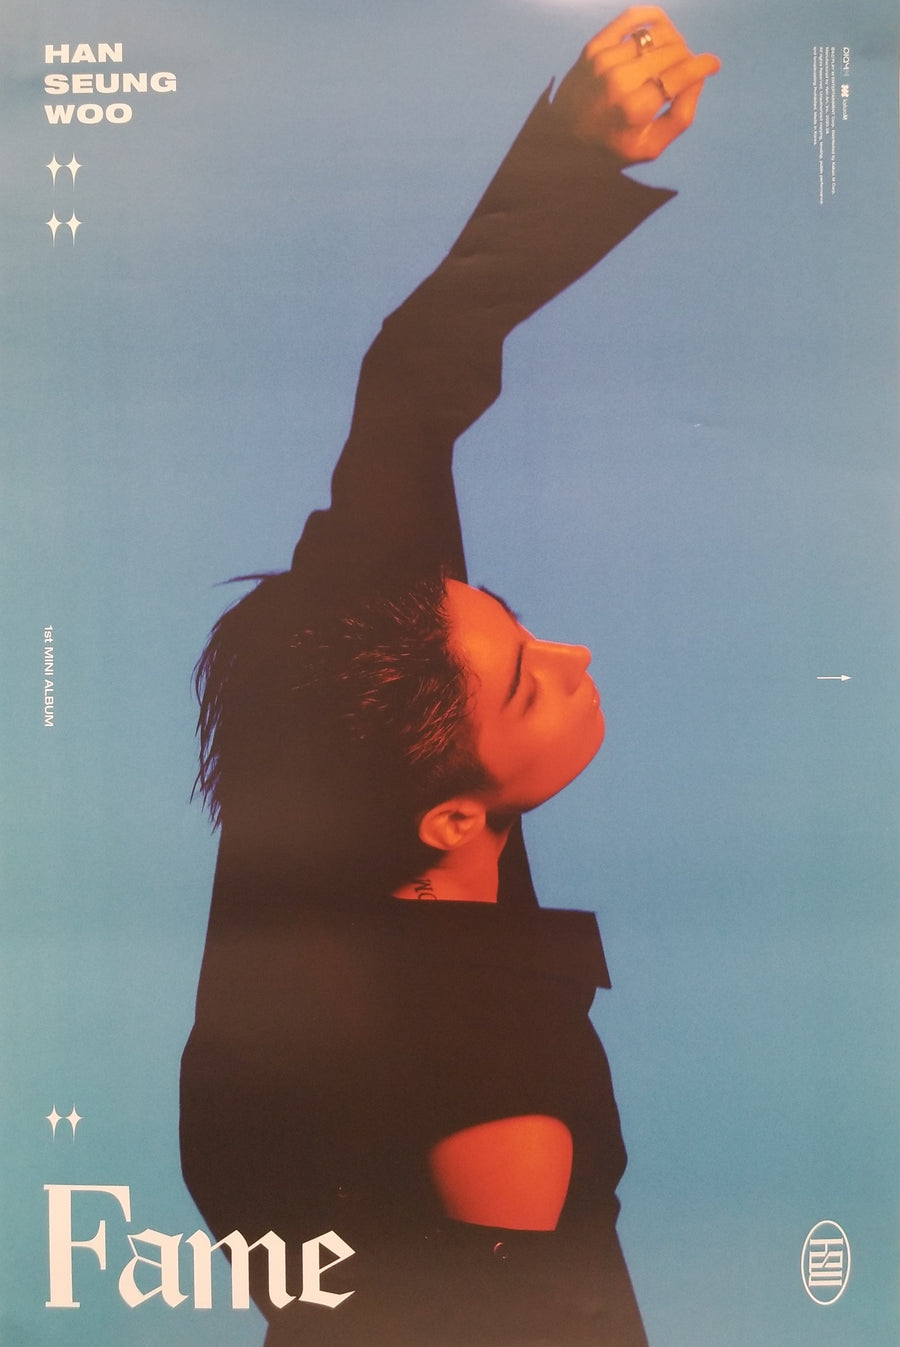 HAN SEUNG WOO 1st Mini Album Fame Official Poster - Photo Concept Woo